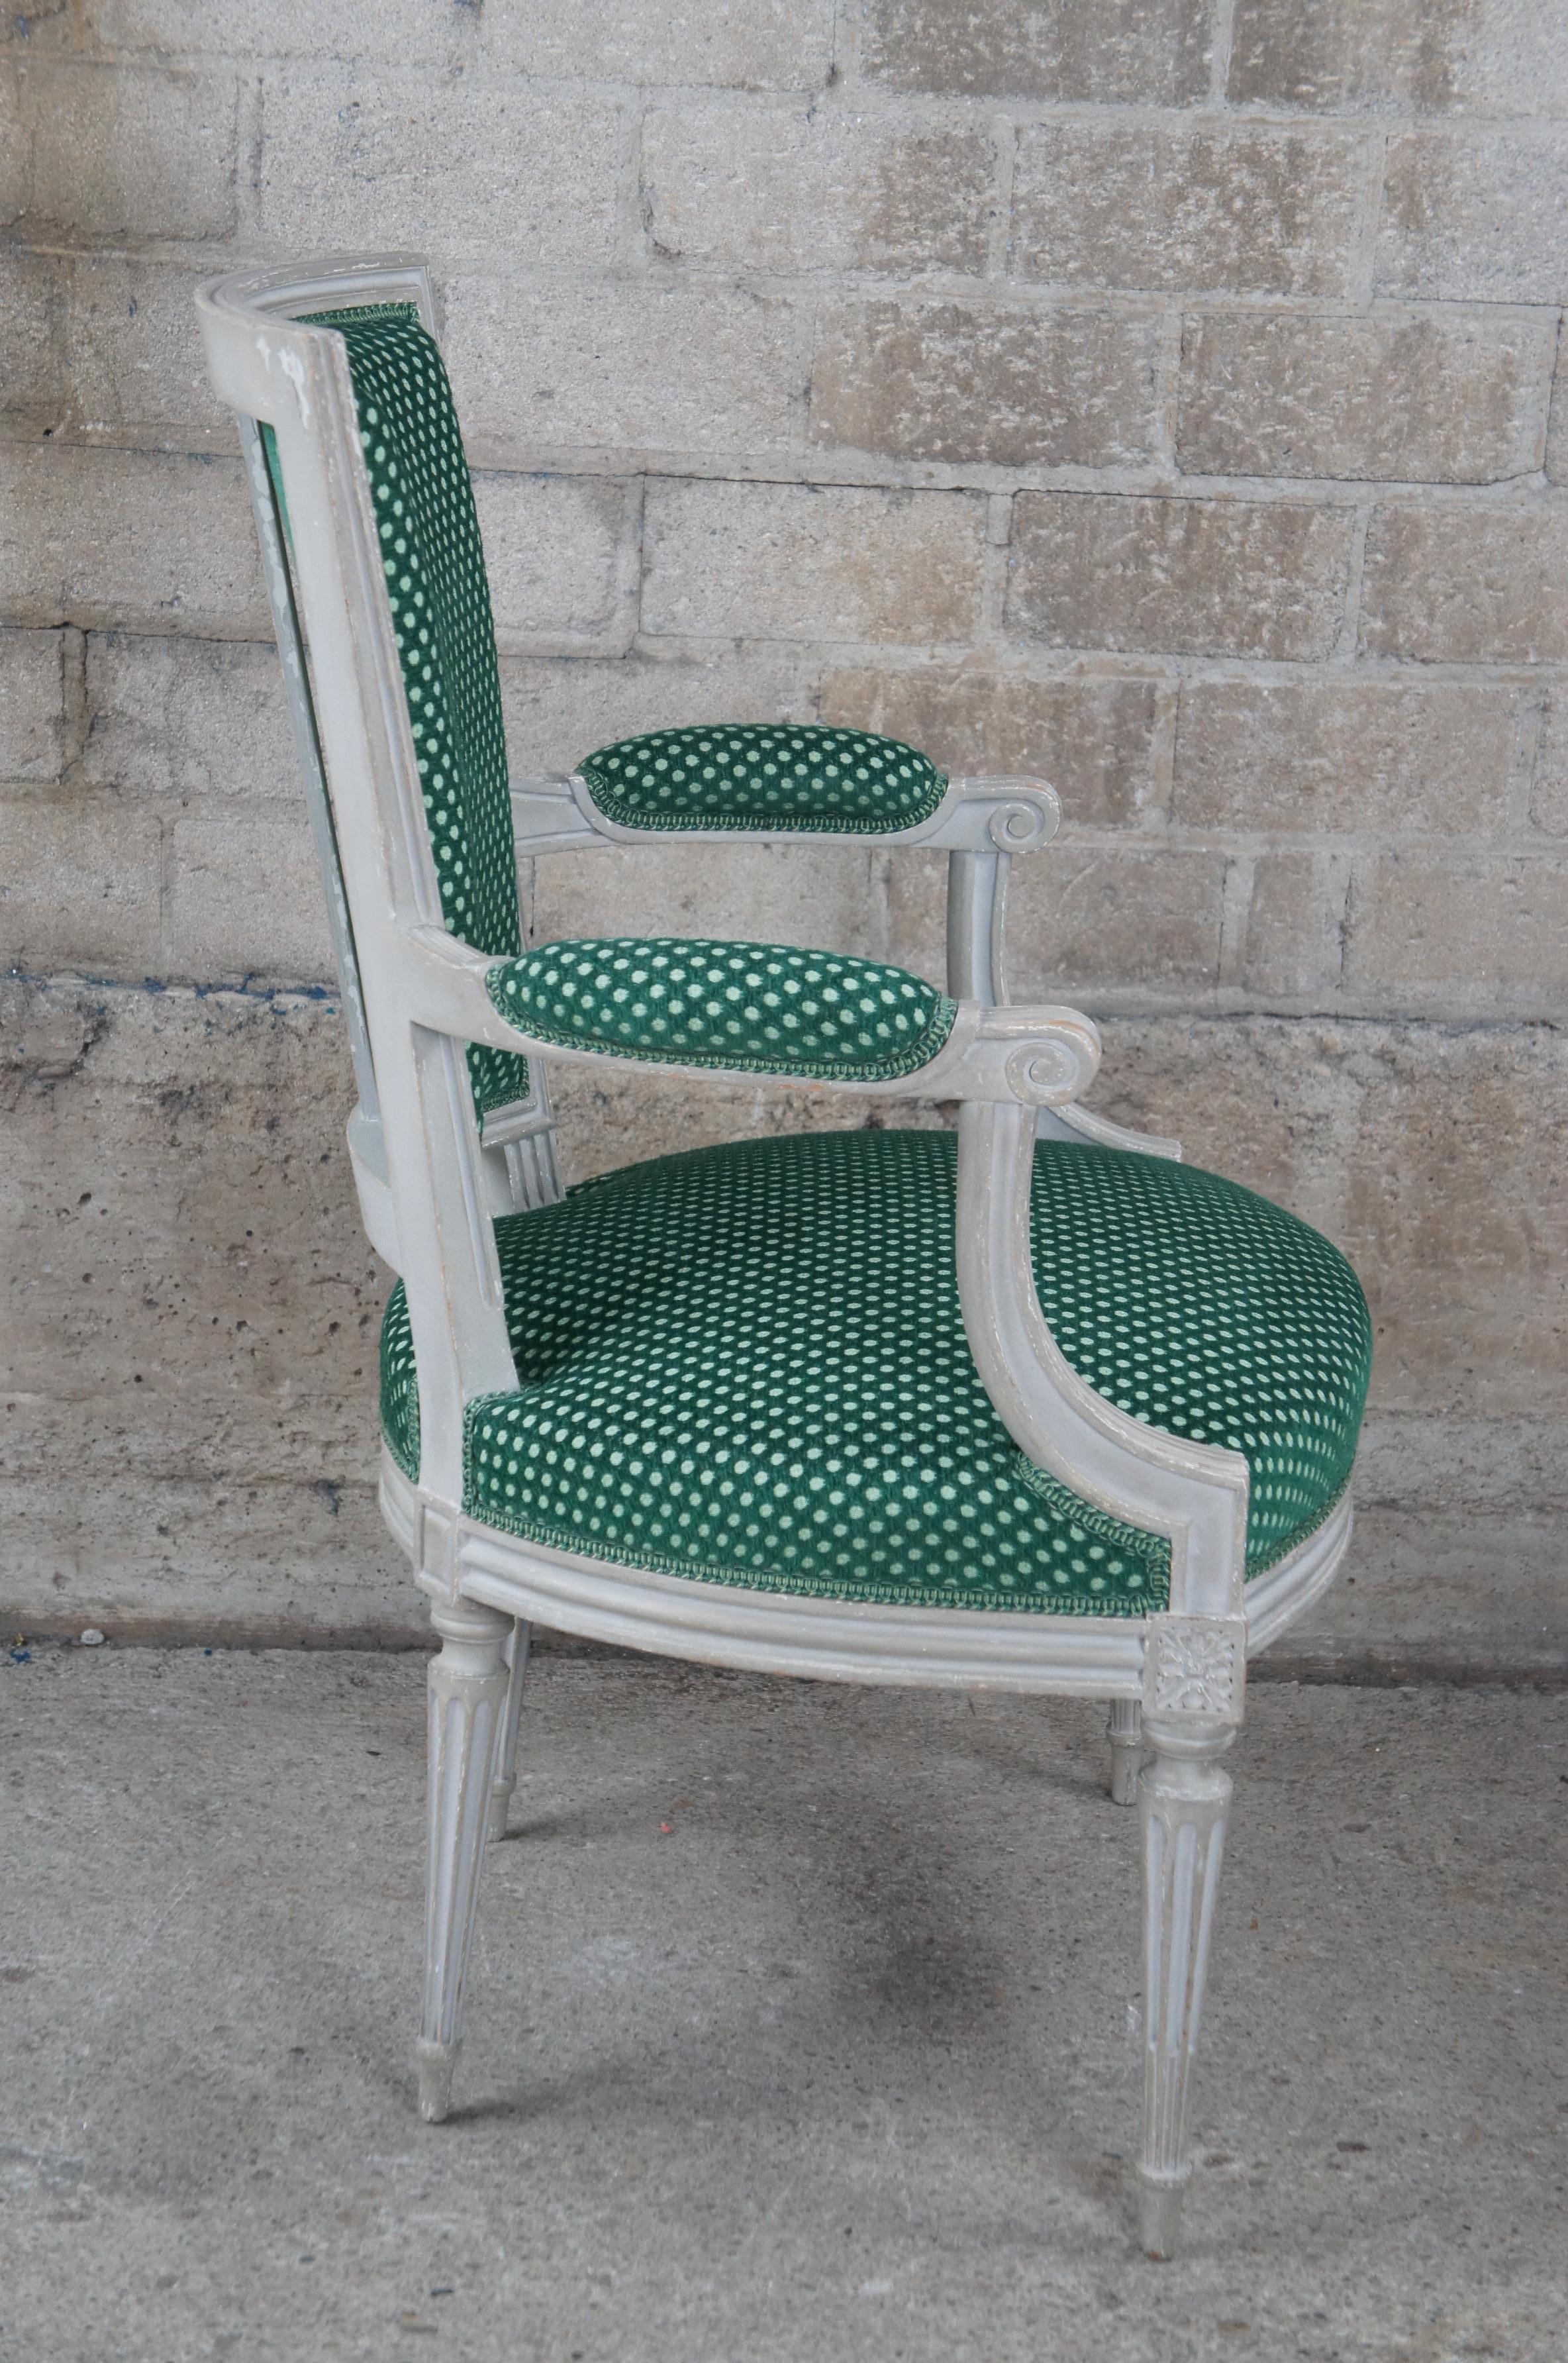 Mid-20th Century Vintage Louis XVI Style Fauteuil Library Arm Chair French Provincial Polka Dot For Sale